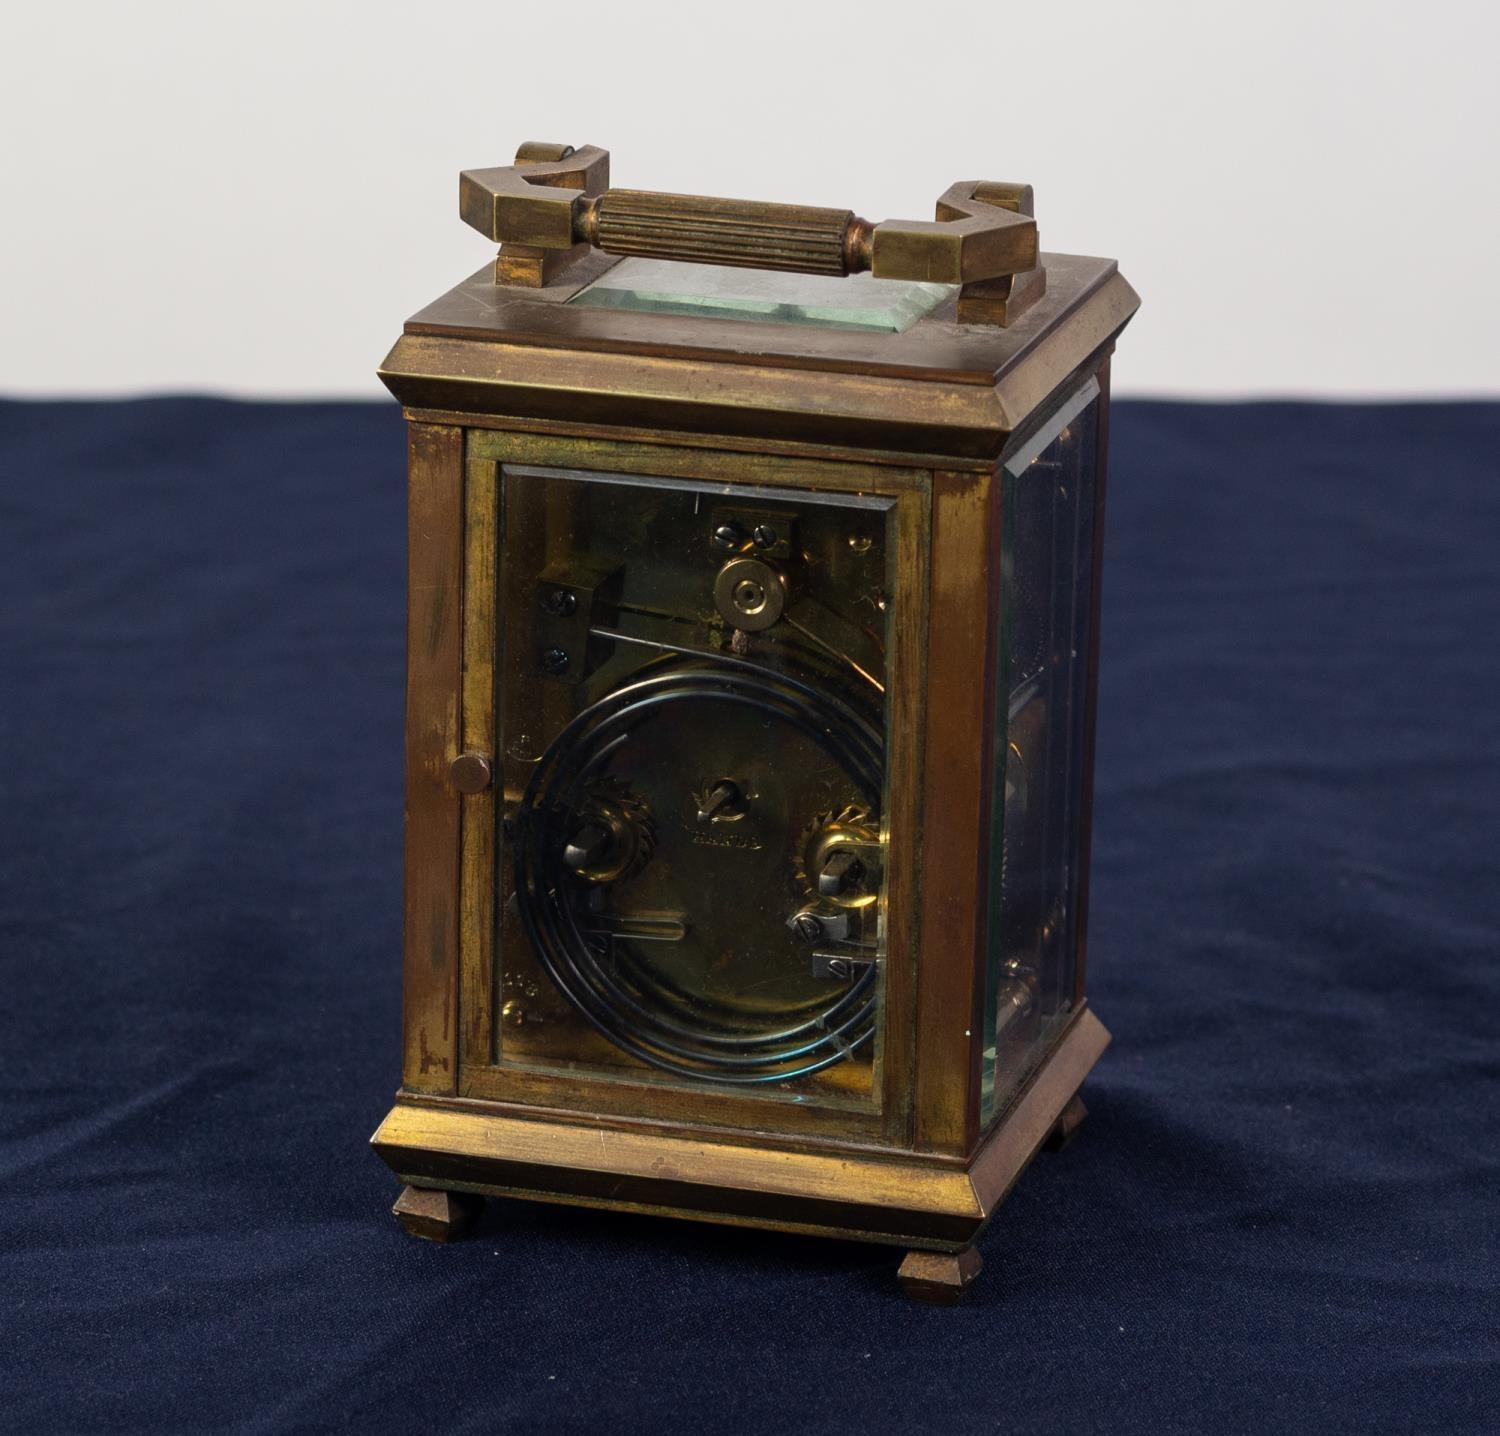 EARLY 1900s BRASS CASED CARRIAGE CLOCK, the repeater movement striking on a coiled gong, the white - Image 2 of 3